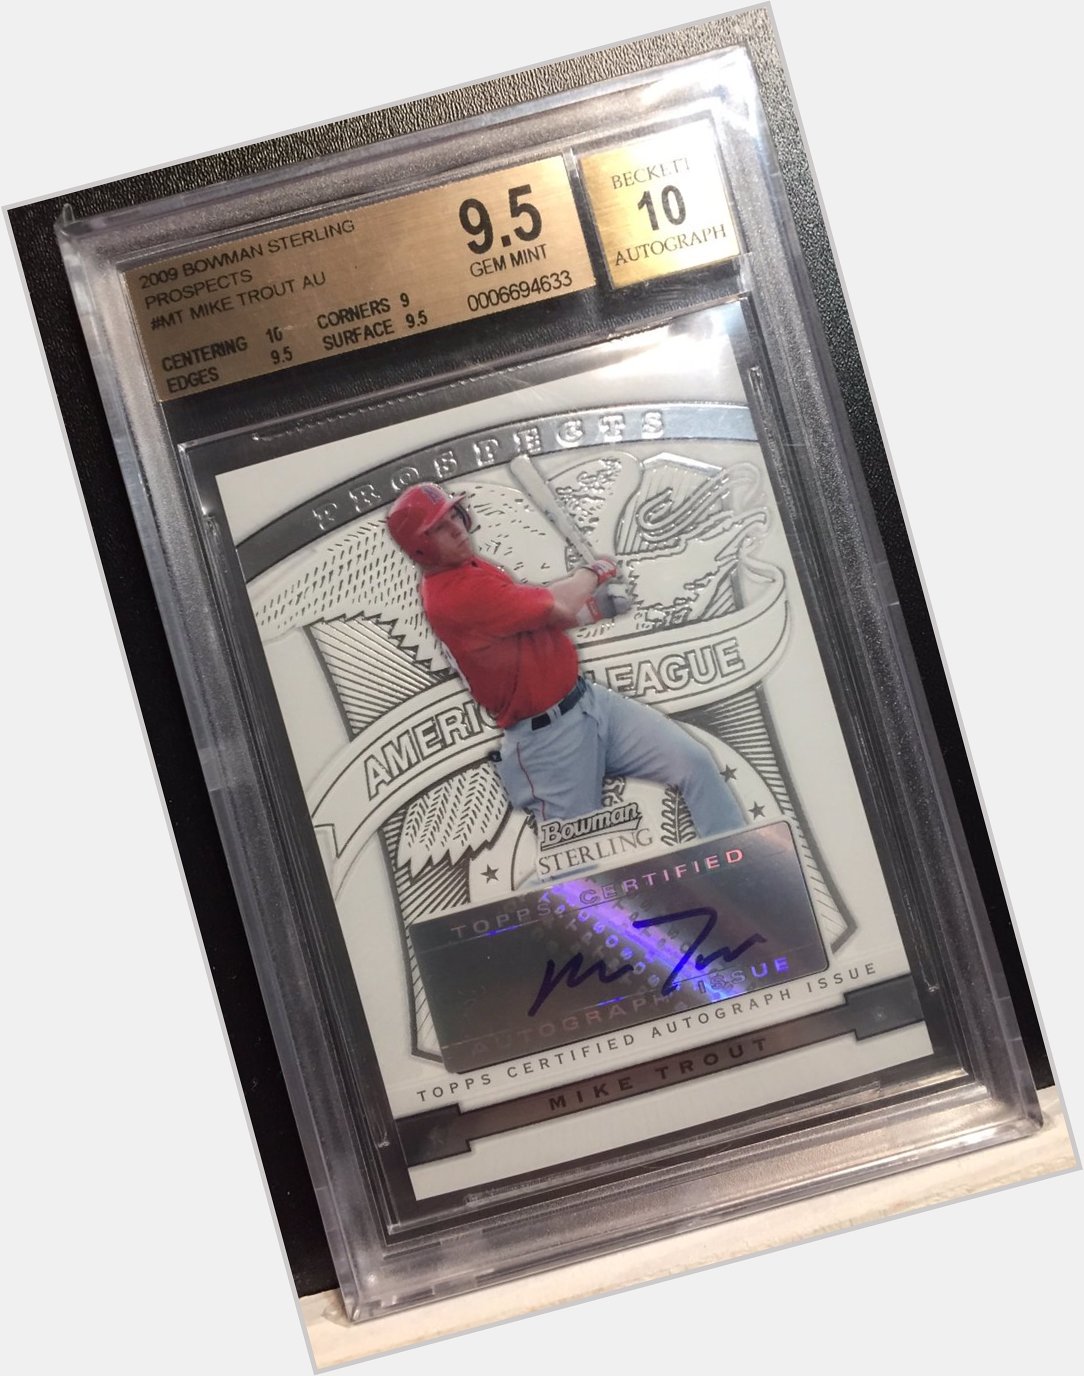 Happy Birthday Mike Trout. Here are a few top from my PC in celebration of his Birthday! 